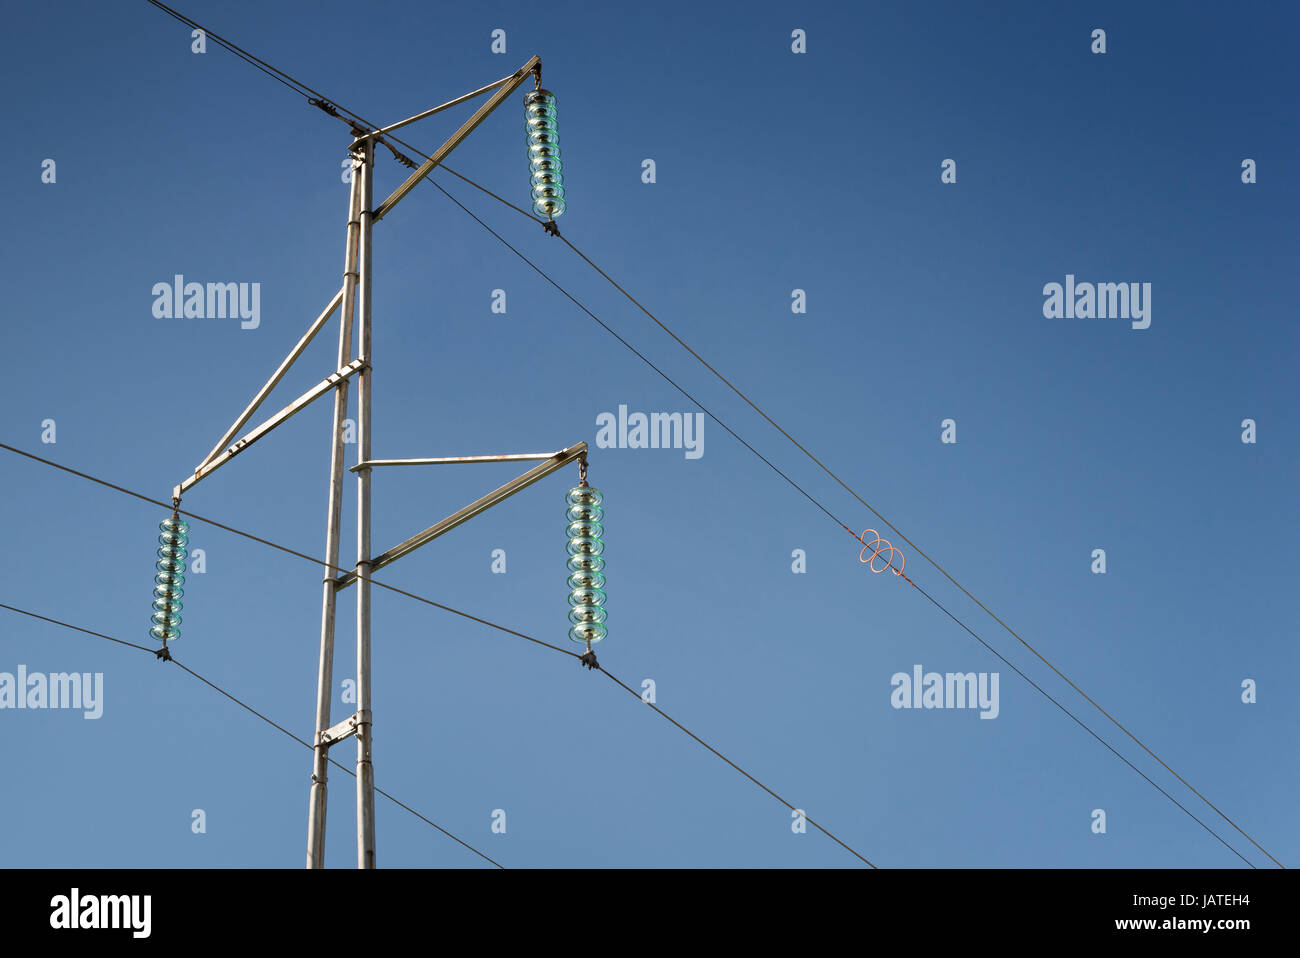 Simple electricity pylon with wires and insulators Stock Photo